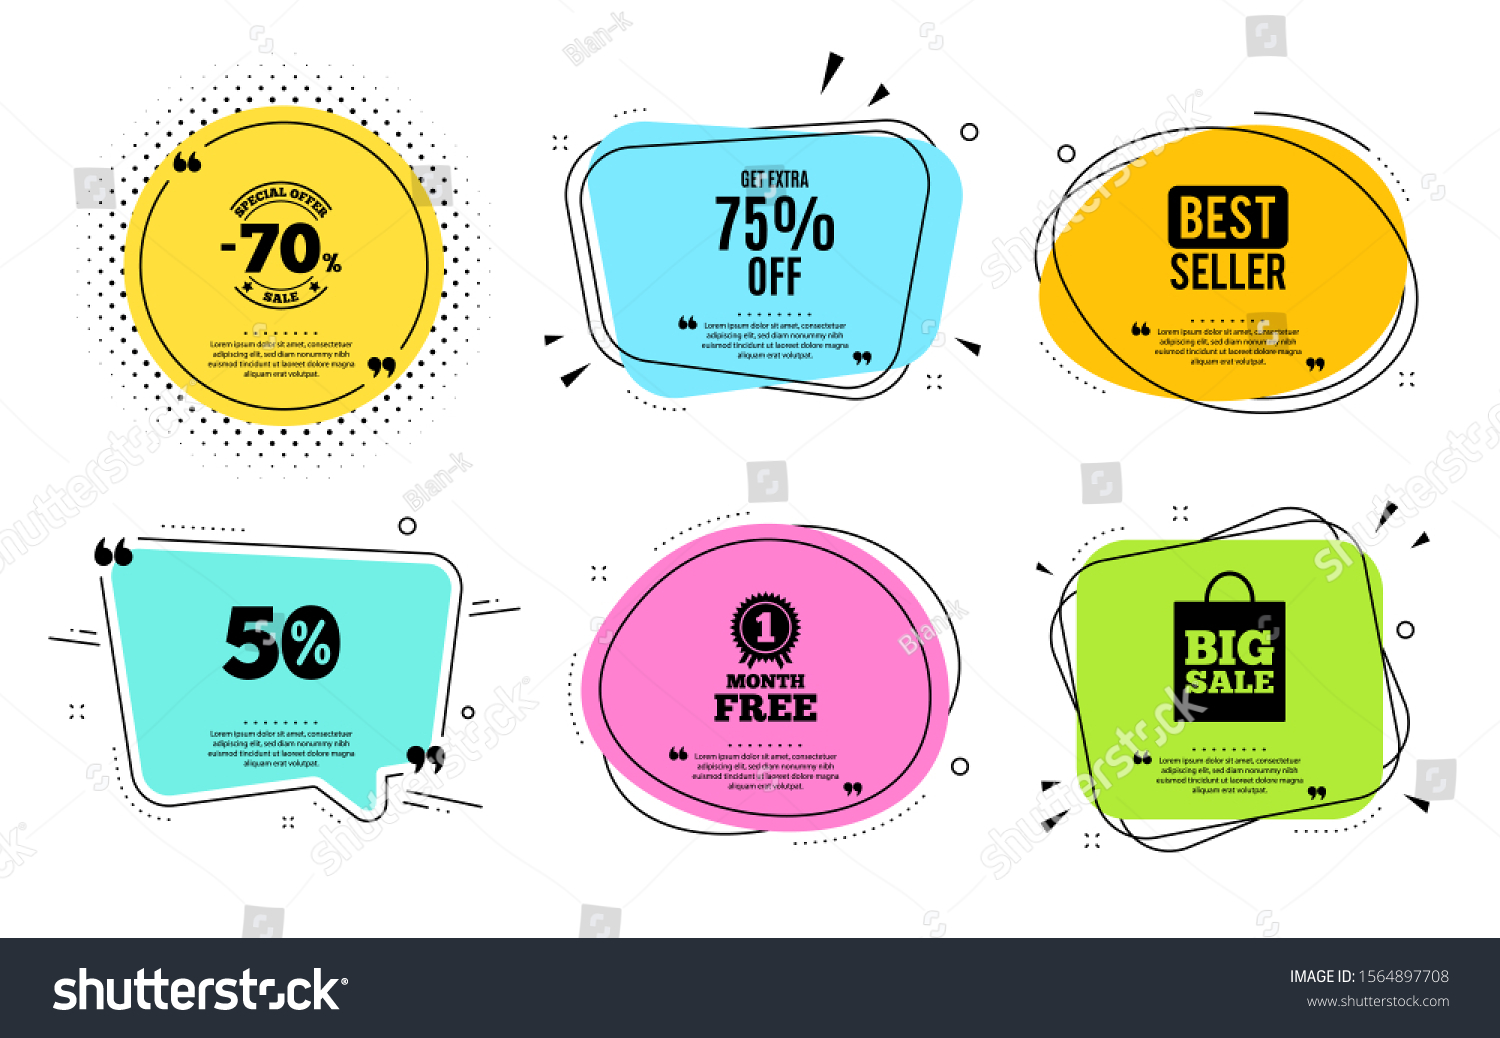 Get Extra 75% off Sale. Best seller, quote text. Discount offer price sign. Special offer symbol. Save 75 percentages. Quotation bubble. Banner badge, texting quote boxes. Extra discount text. Vector #1564897708